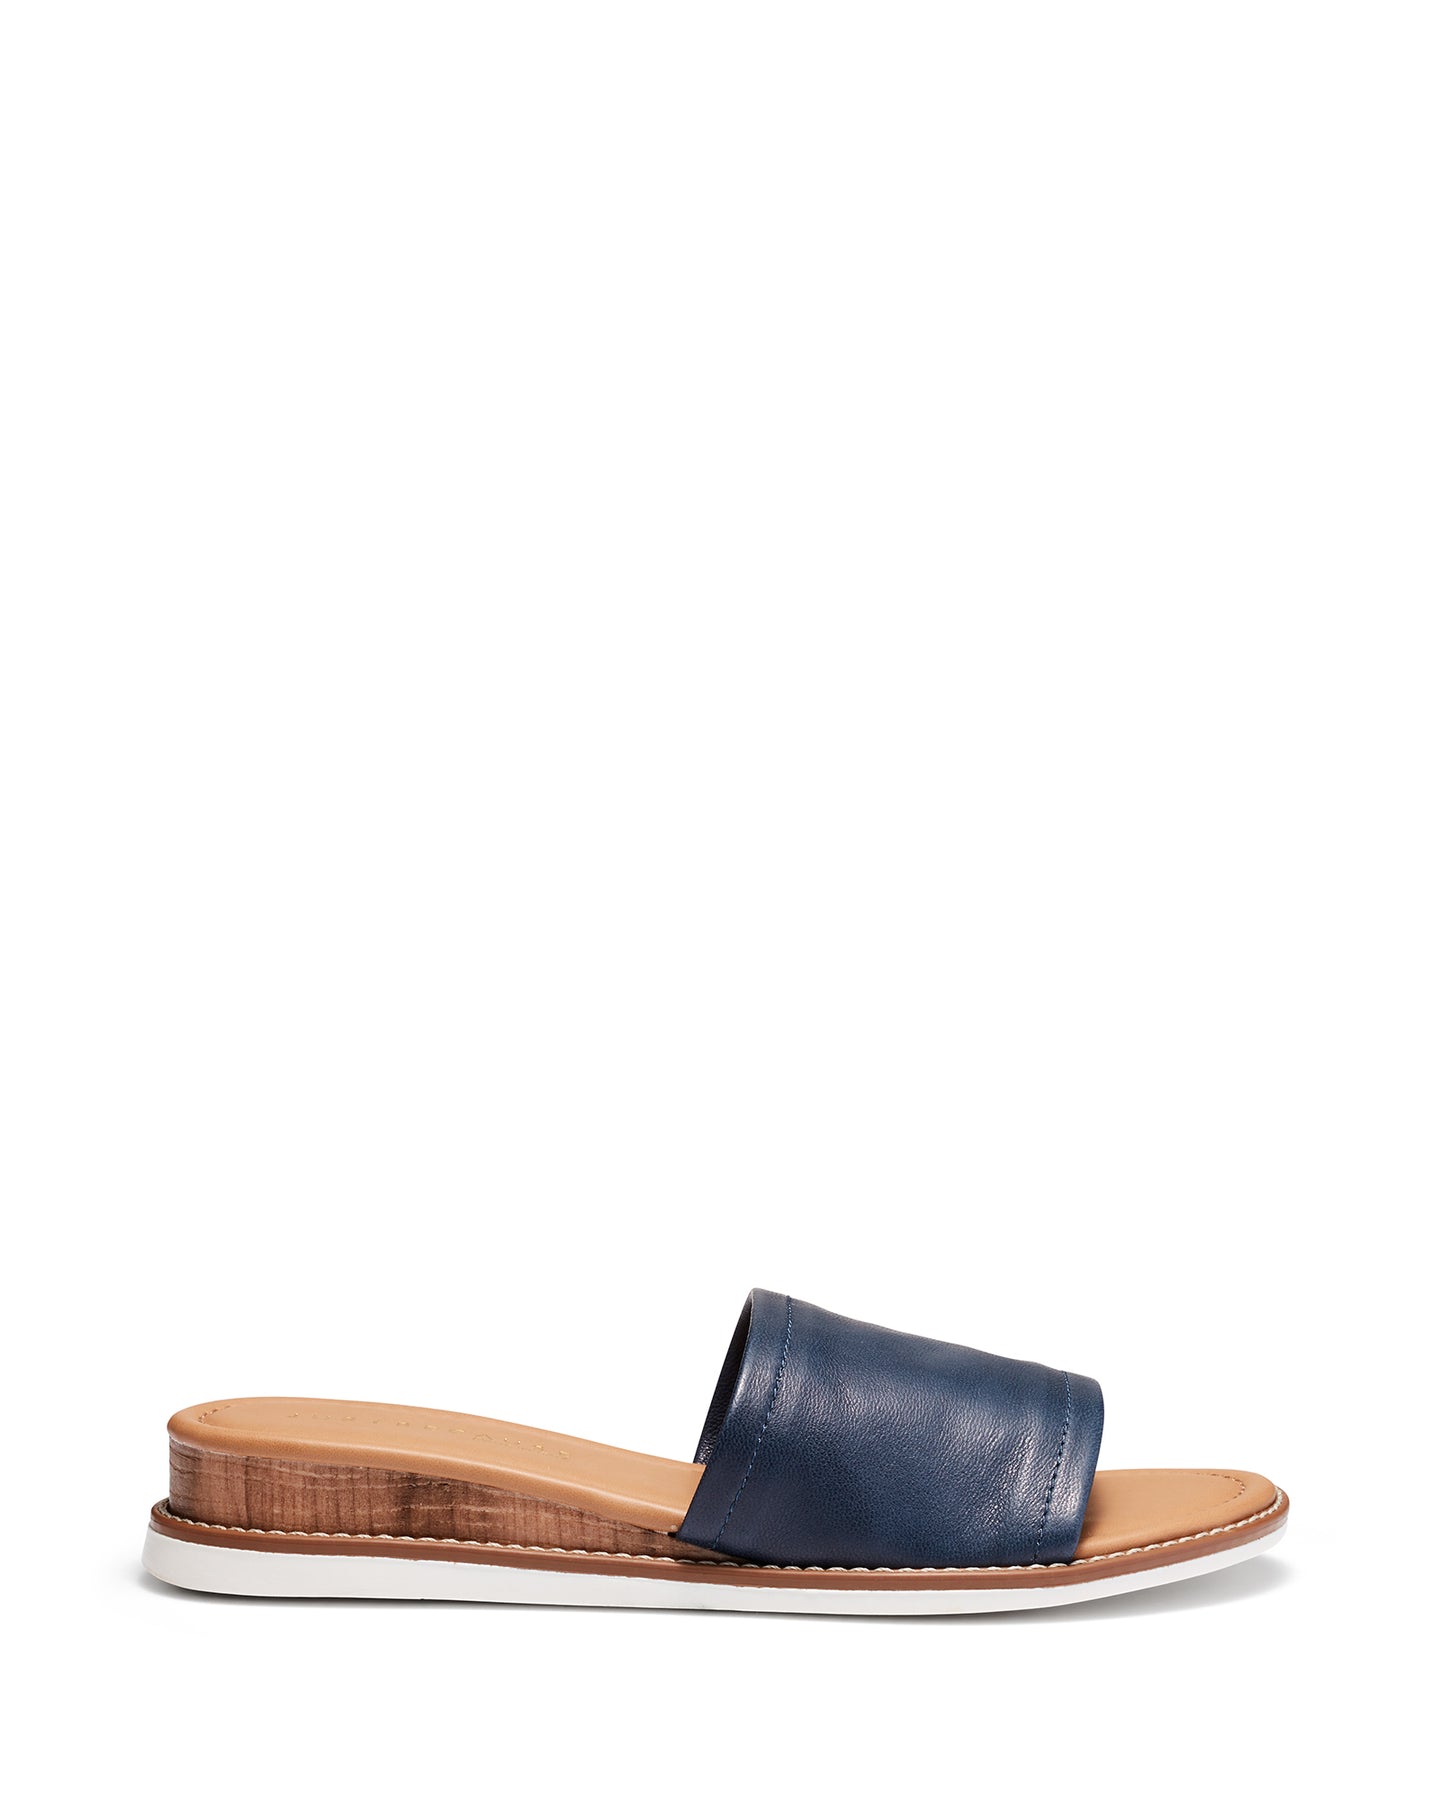 Just Because Shoes Flora Navy | Leather Sandals | Slides | Wedges